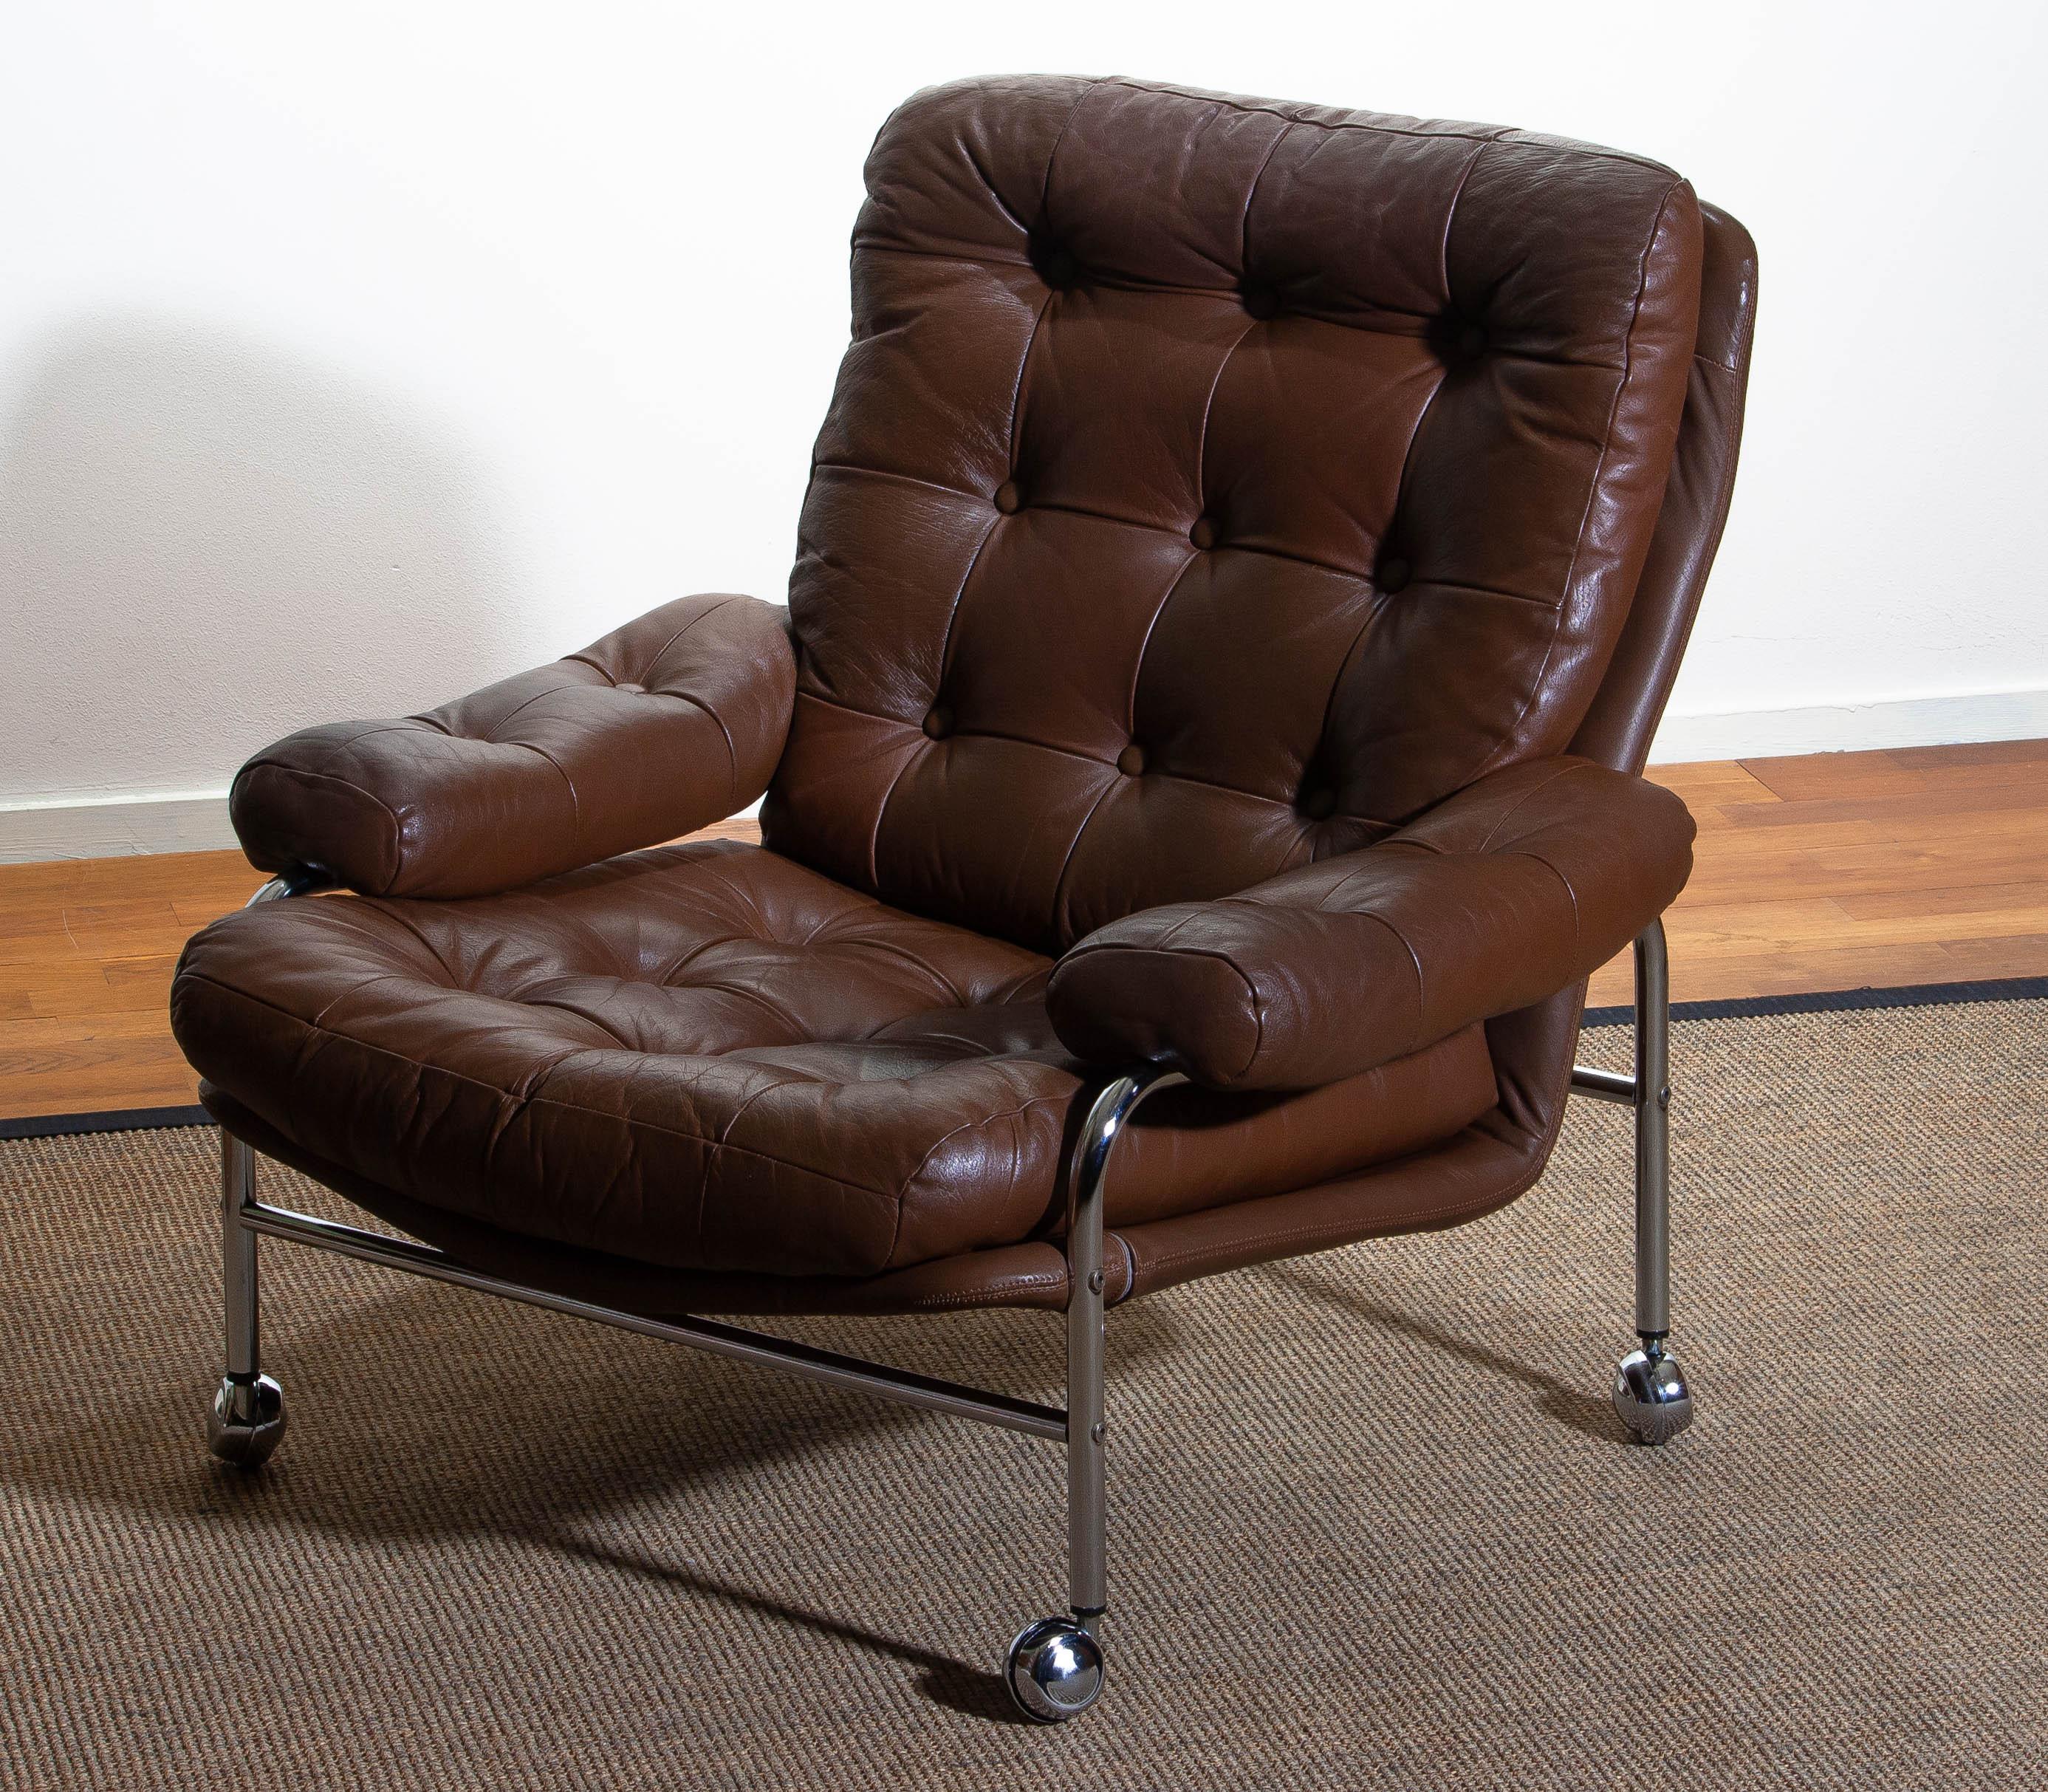 1 Chrome and Brown Leather Easy or Lounge Chair by Scapa Rydaholm, Sweden, 1970s 2